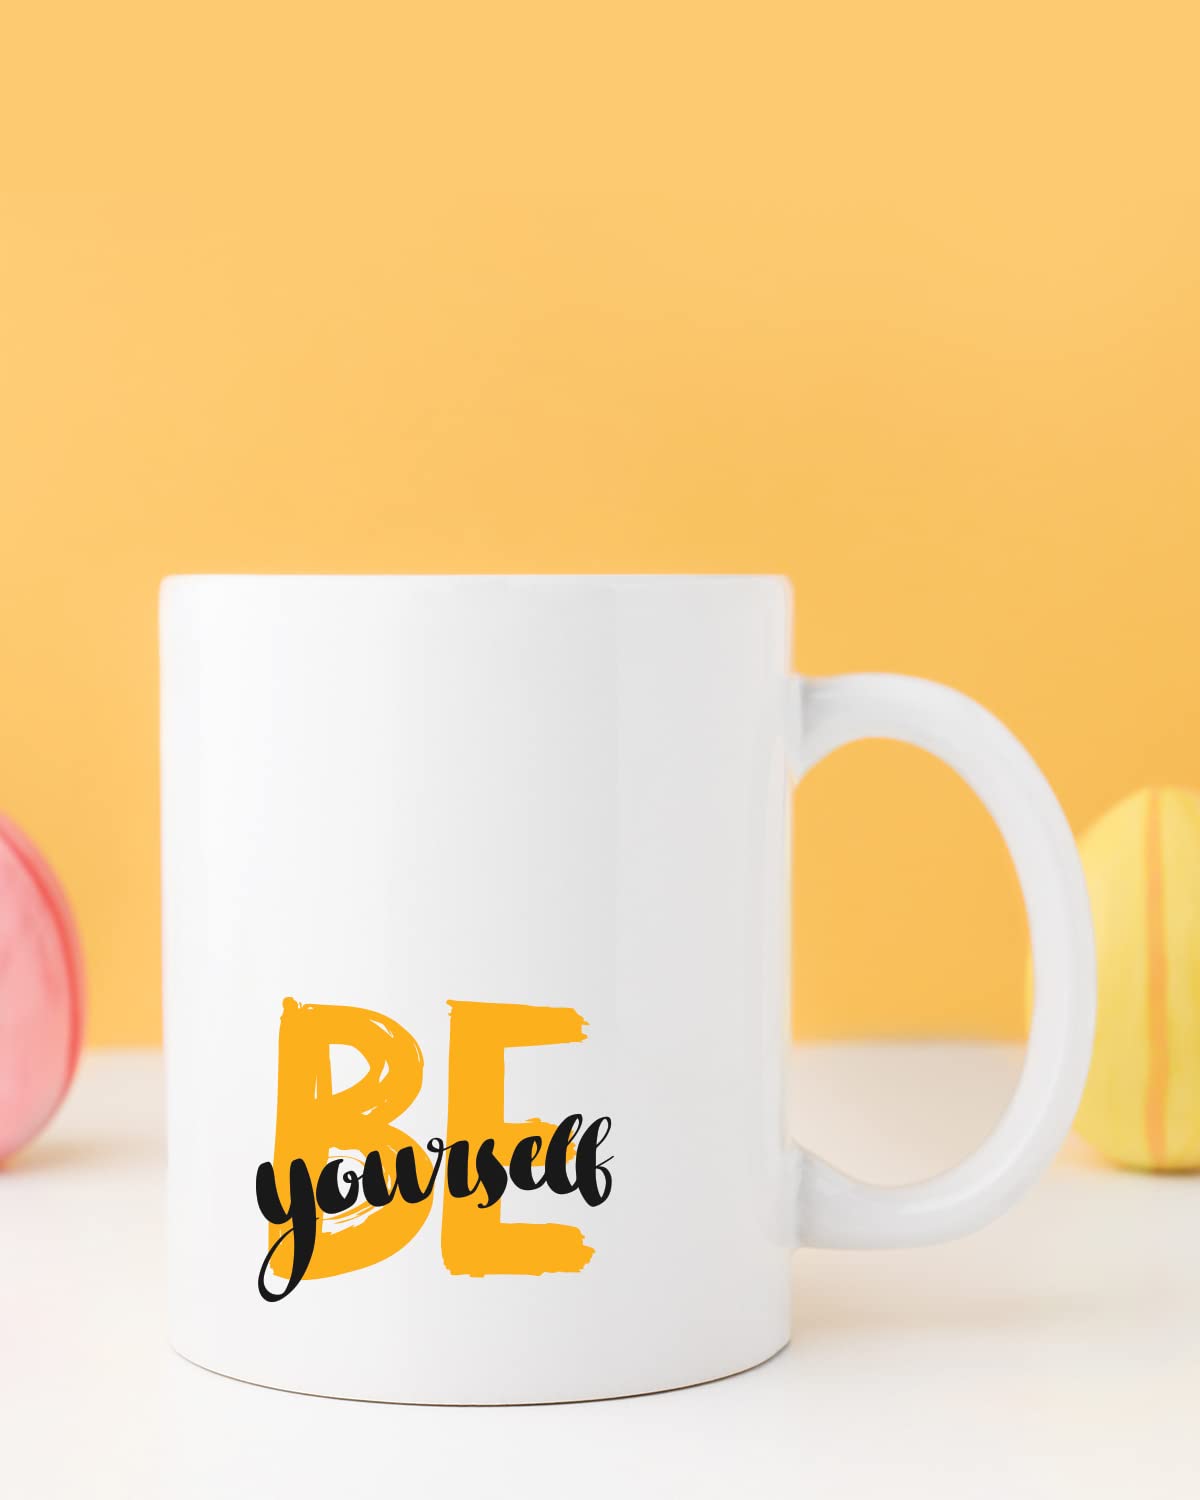 BE Yourself Coffee Mug - Birthday Gift, Motivational Mug, Printed with Inspiring Quotes, Positivity Mug, Inspirational Gift for Him & Her, Best Friend Gift, Gifts for Her, Cheer Up Gift